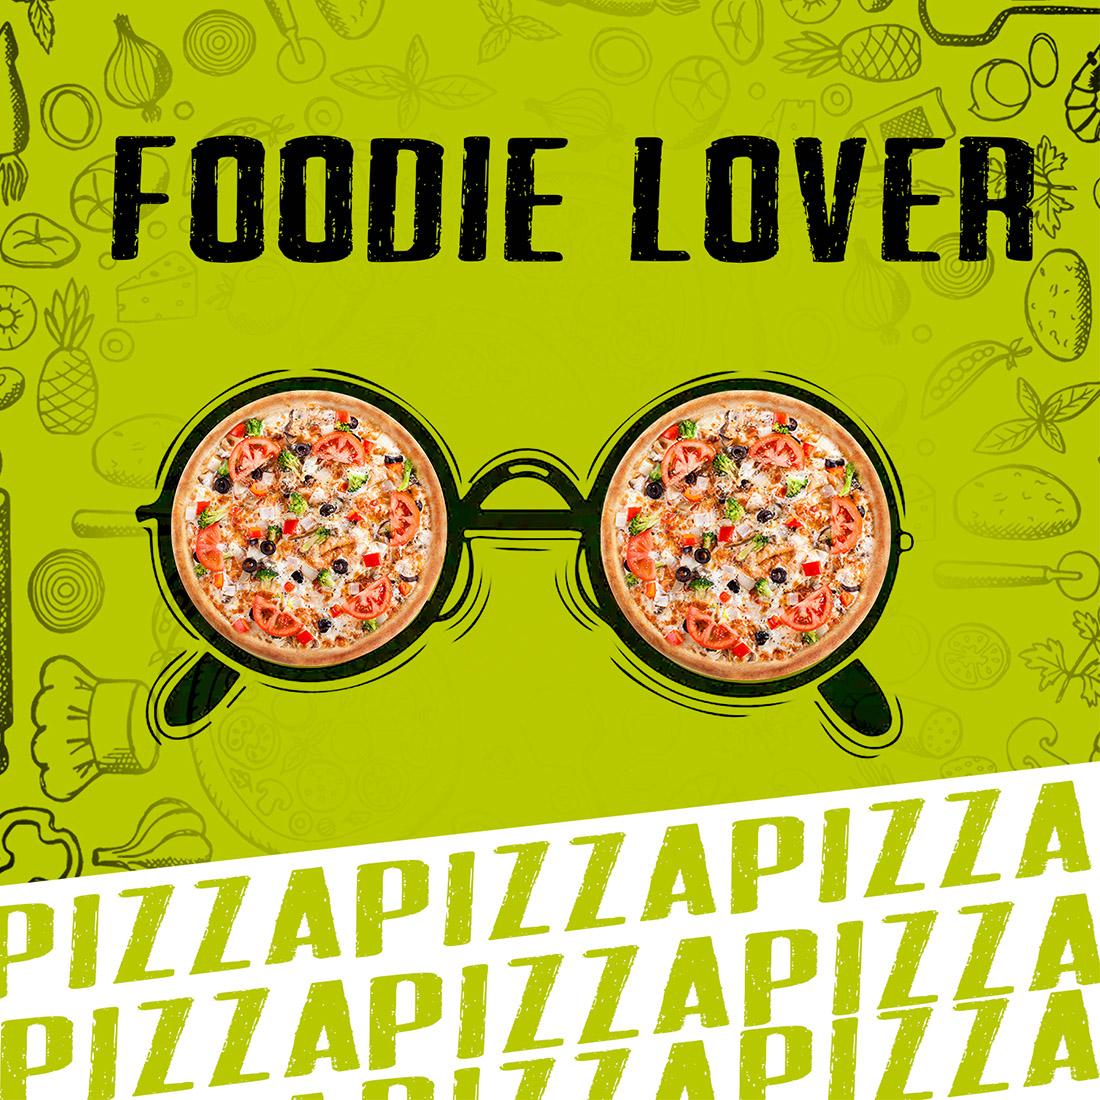 Pizza Vision cover image.